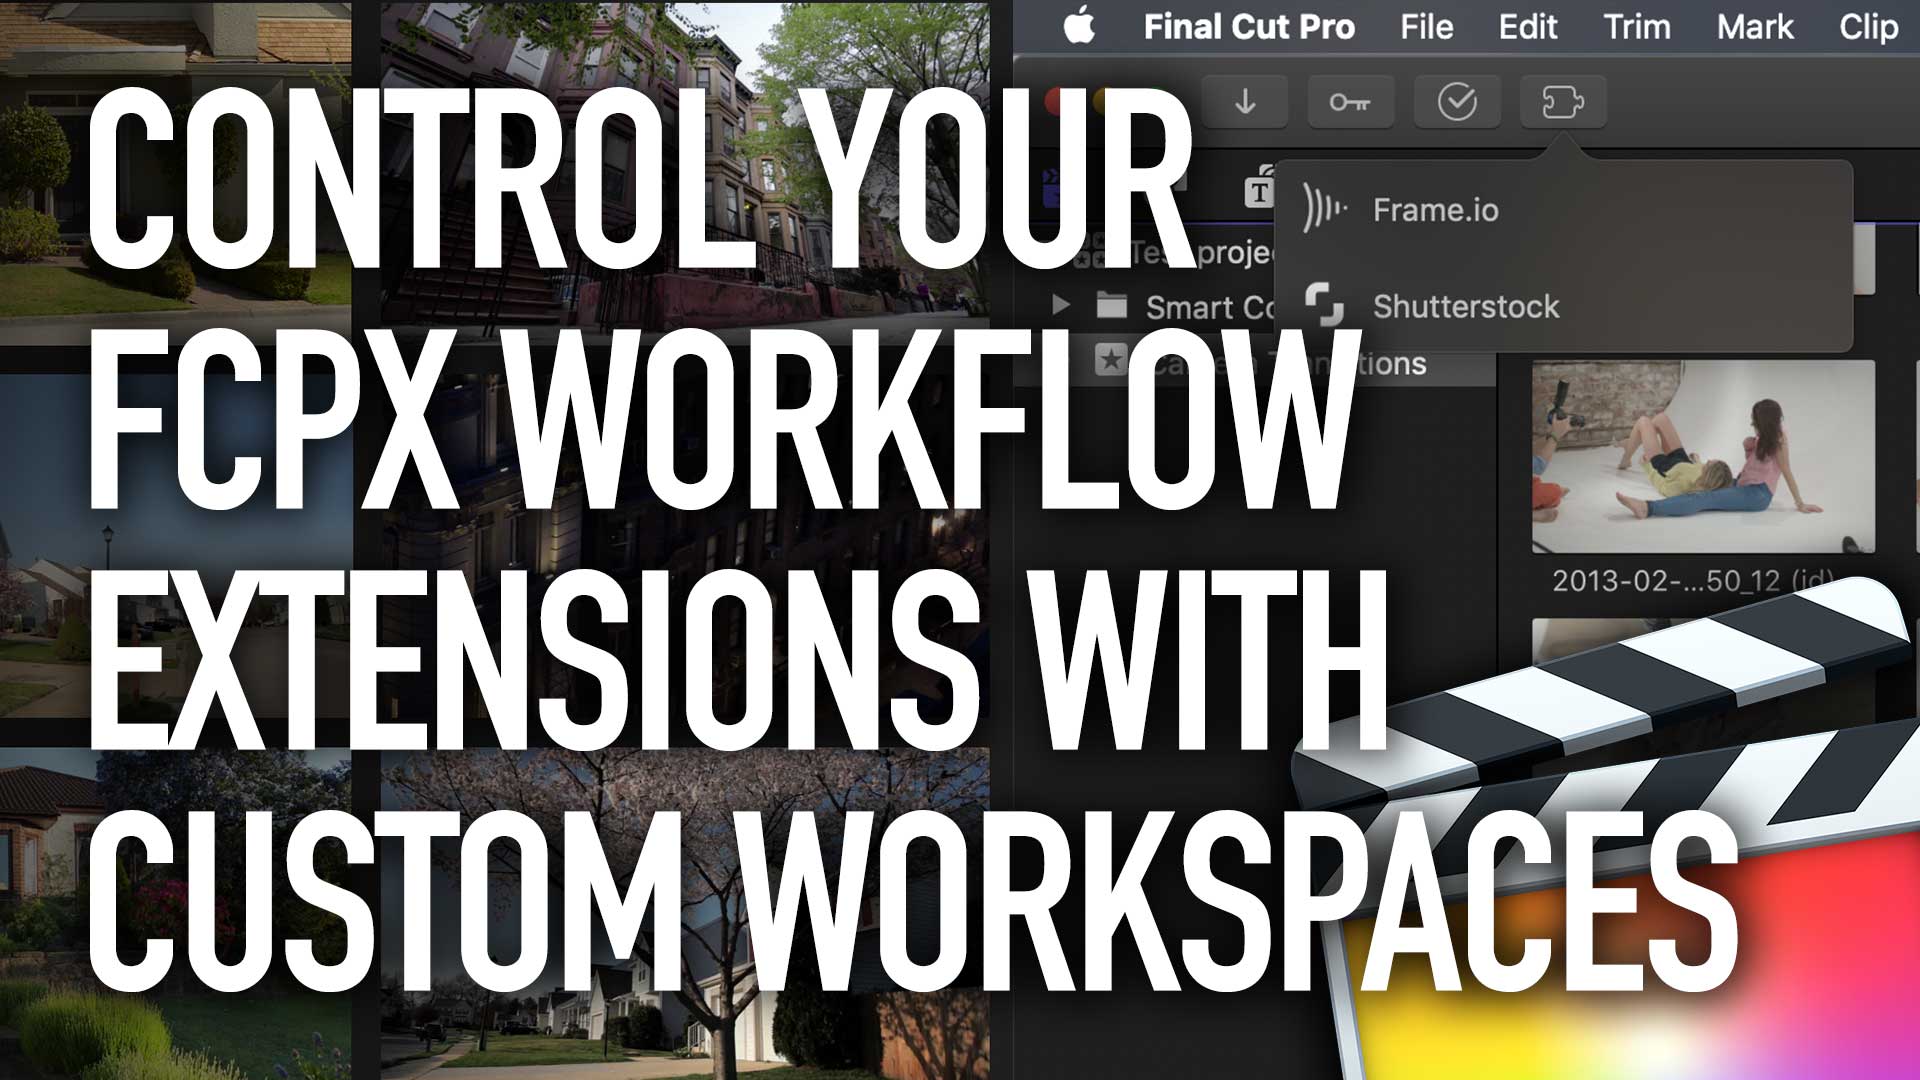 How to Control All Your FCPX Workflow Extensions with Custom Workspaces